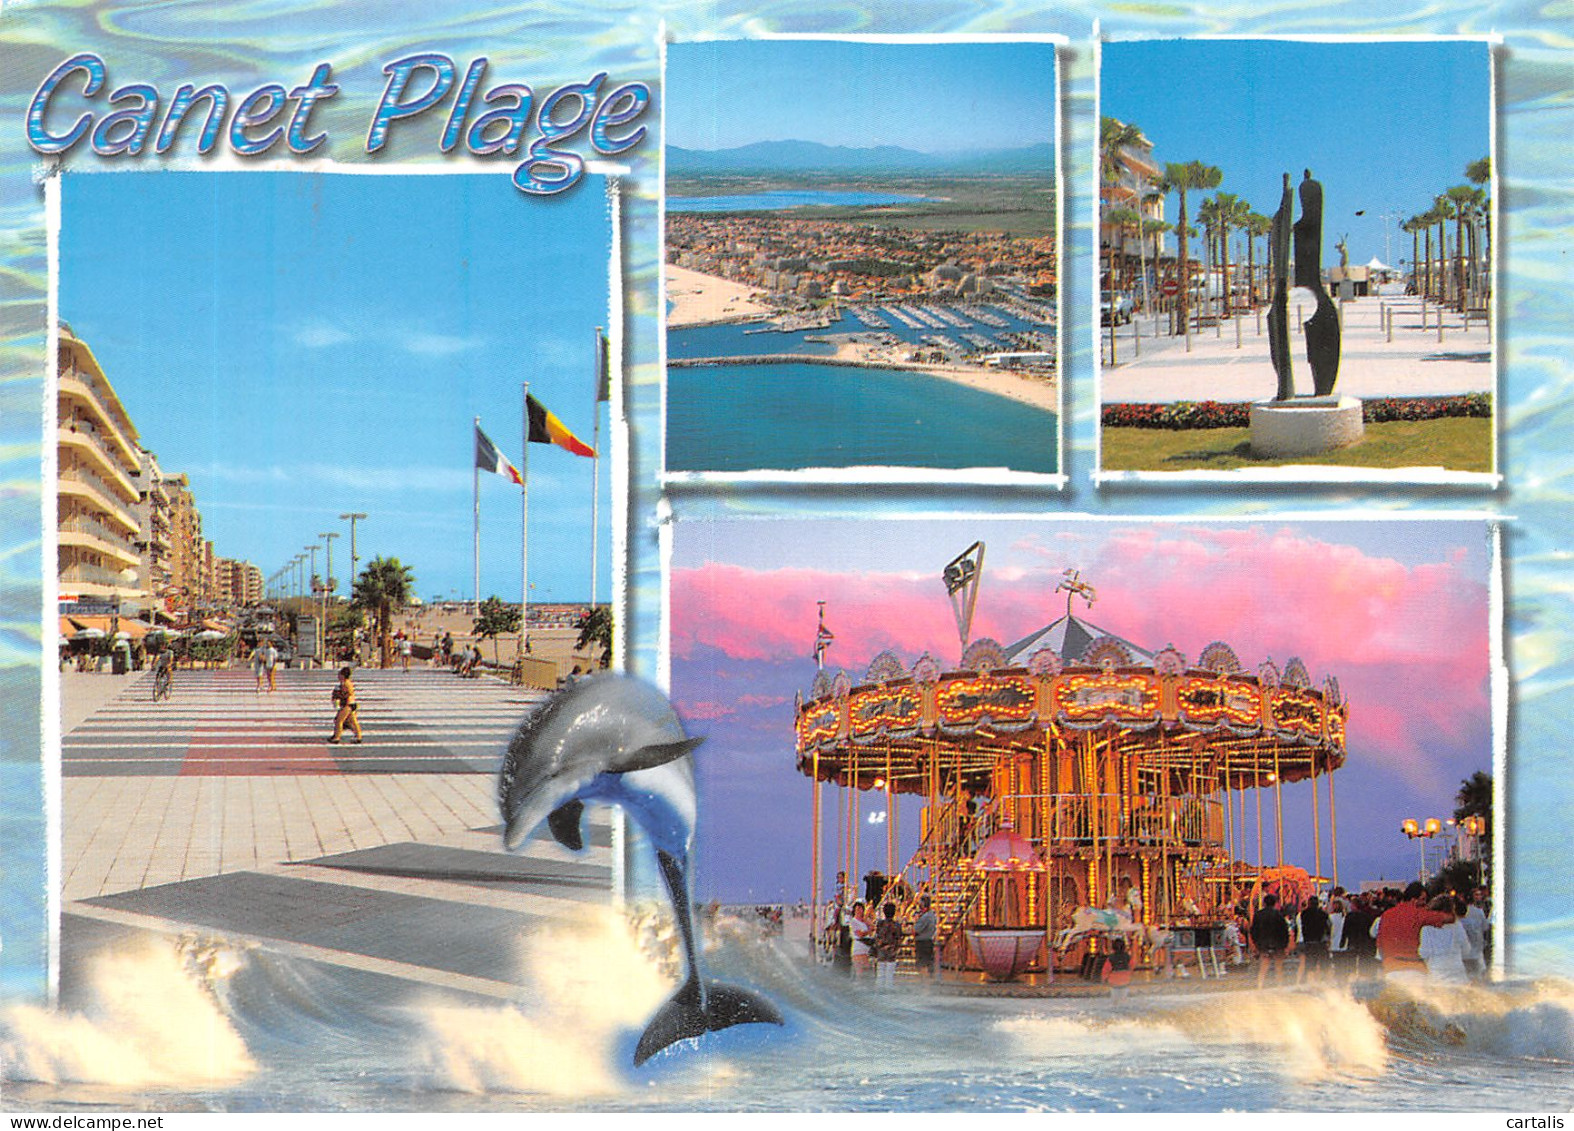 66-CANET PLAGE-N°4250-C/0355 - Canet Plage